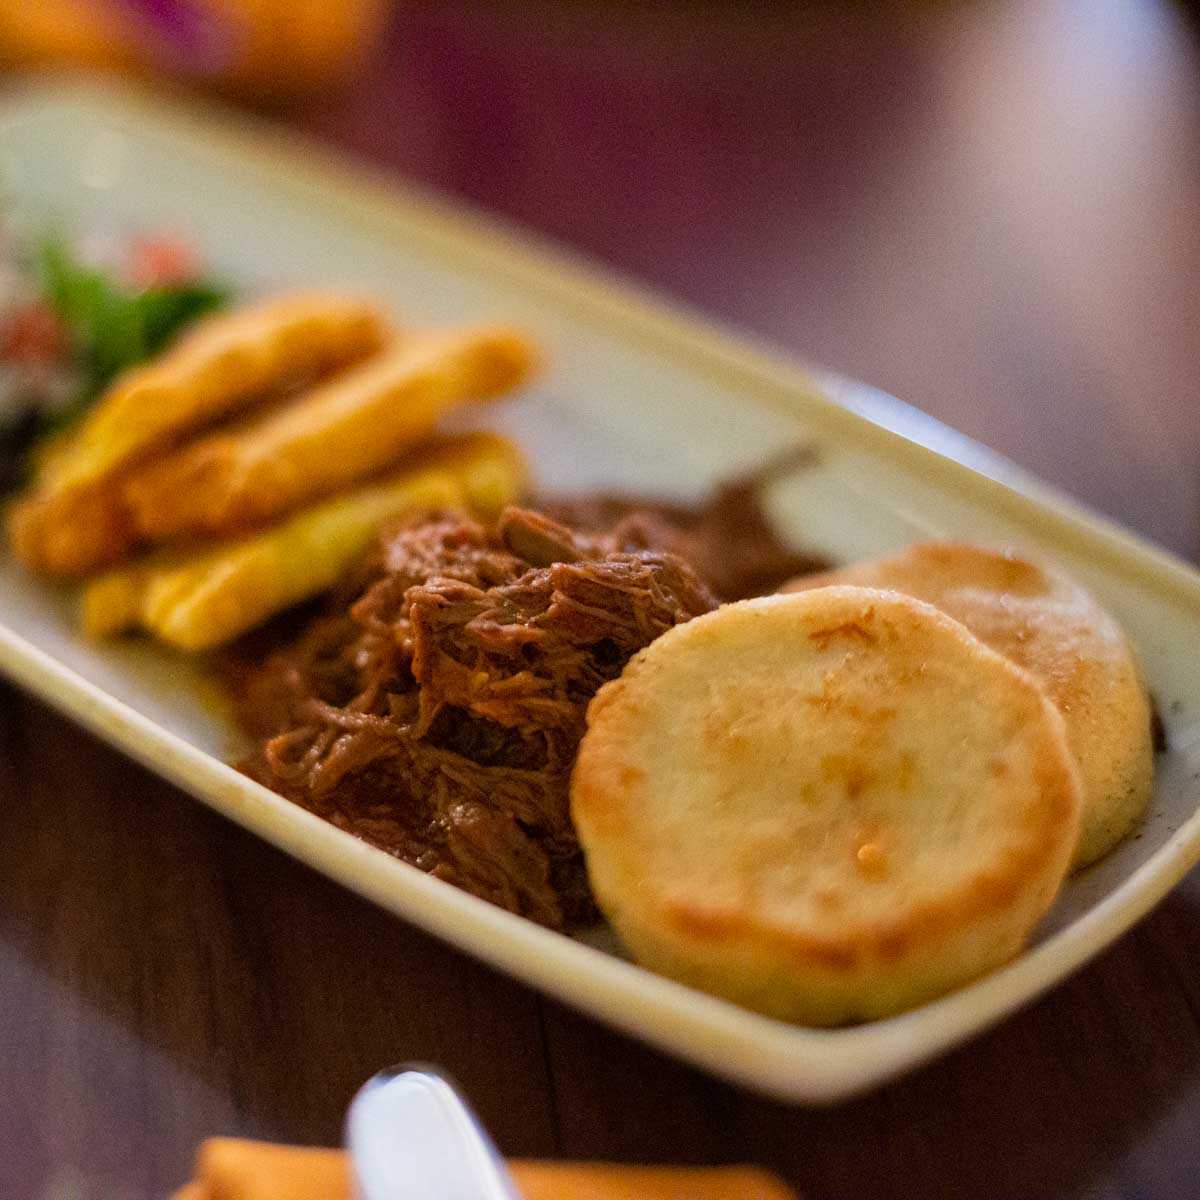 A plate of pulled pork next to corn cakes.